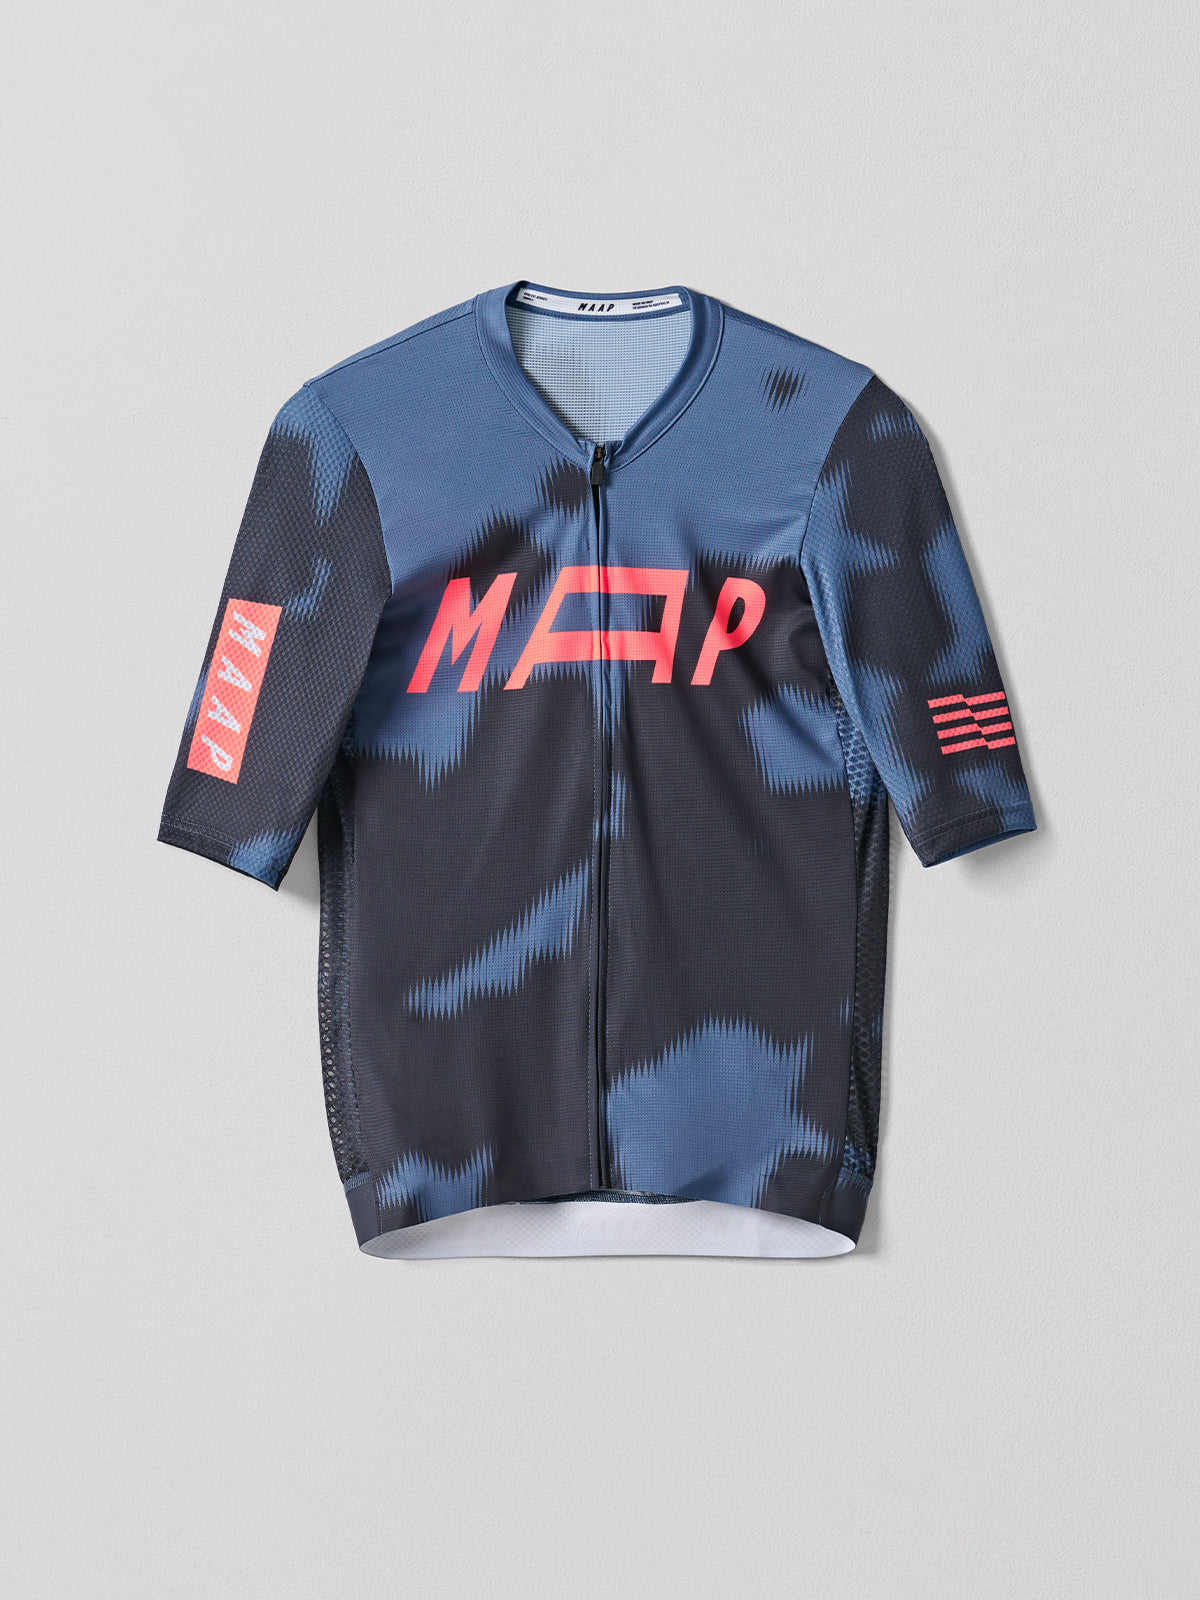 Privateer H.S Pro Jersey